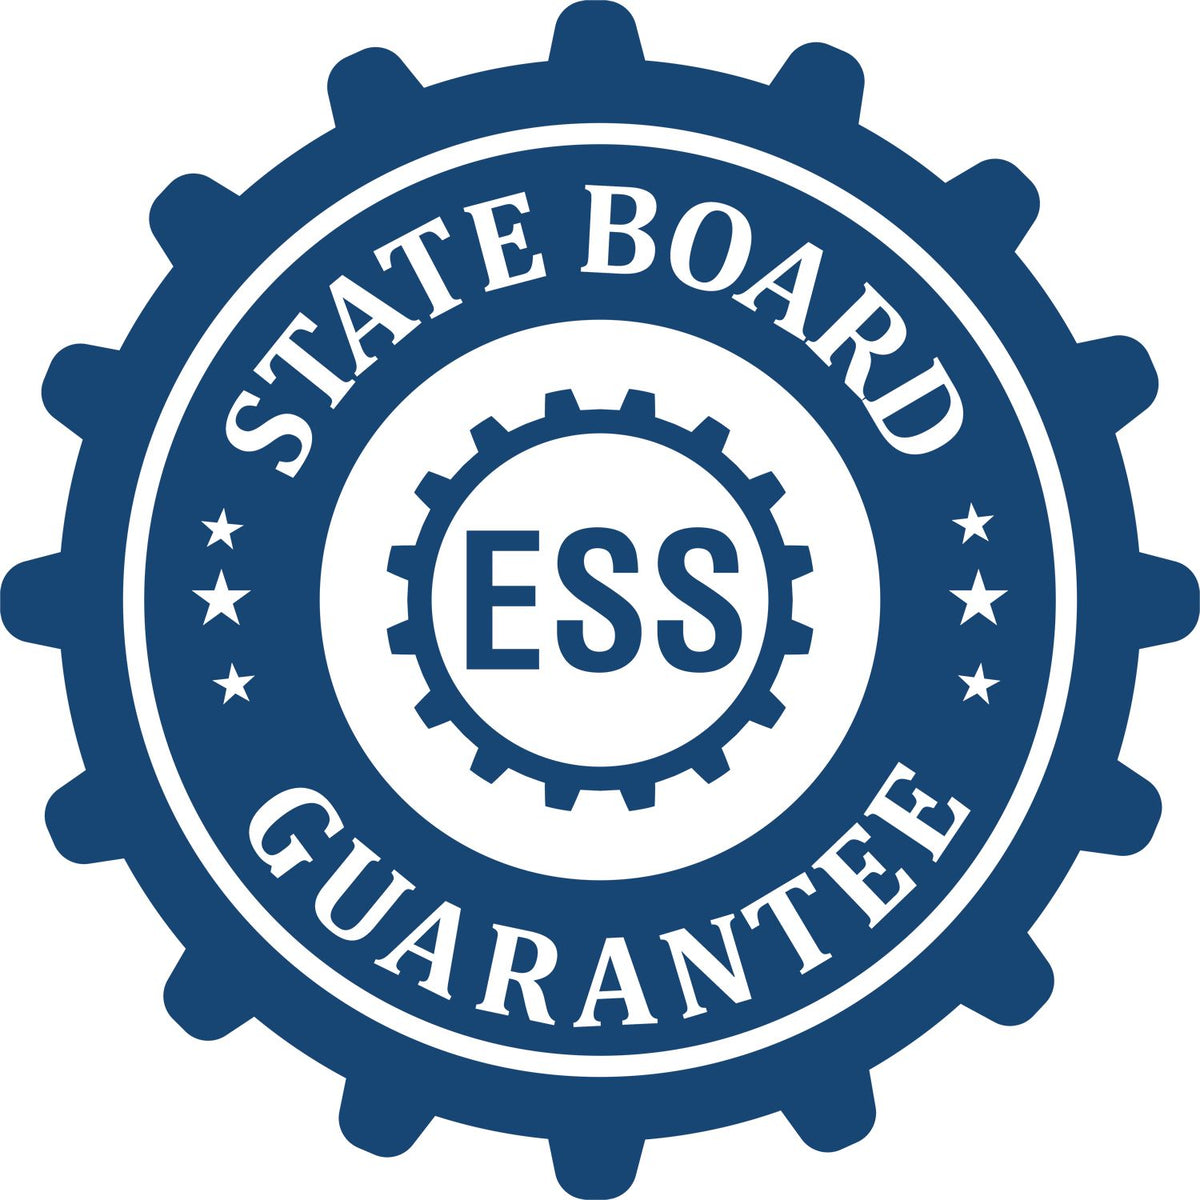 An emblem in a gear shape illustrating a state board guarantee for the Hybrid Washington Landscape Architect Seal